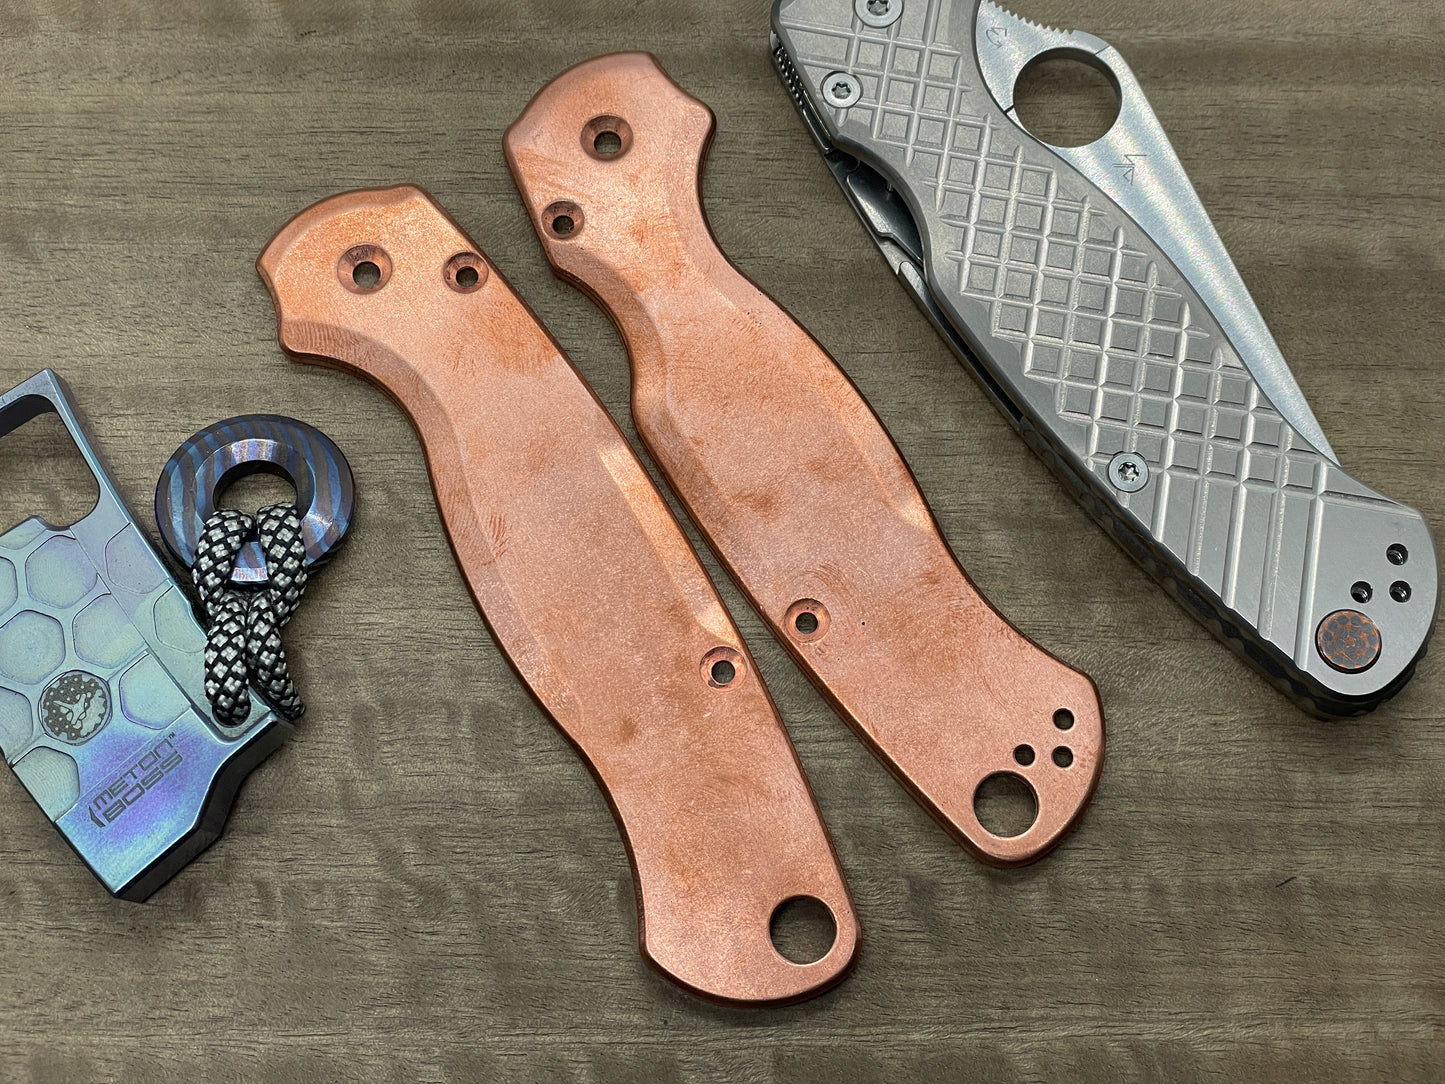 Tumbled Copper scales for Spyderco Paramilitary 2 PM2